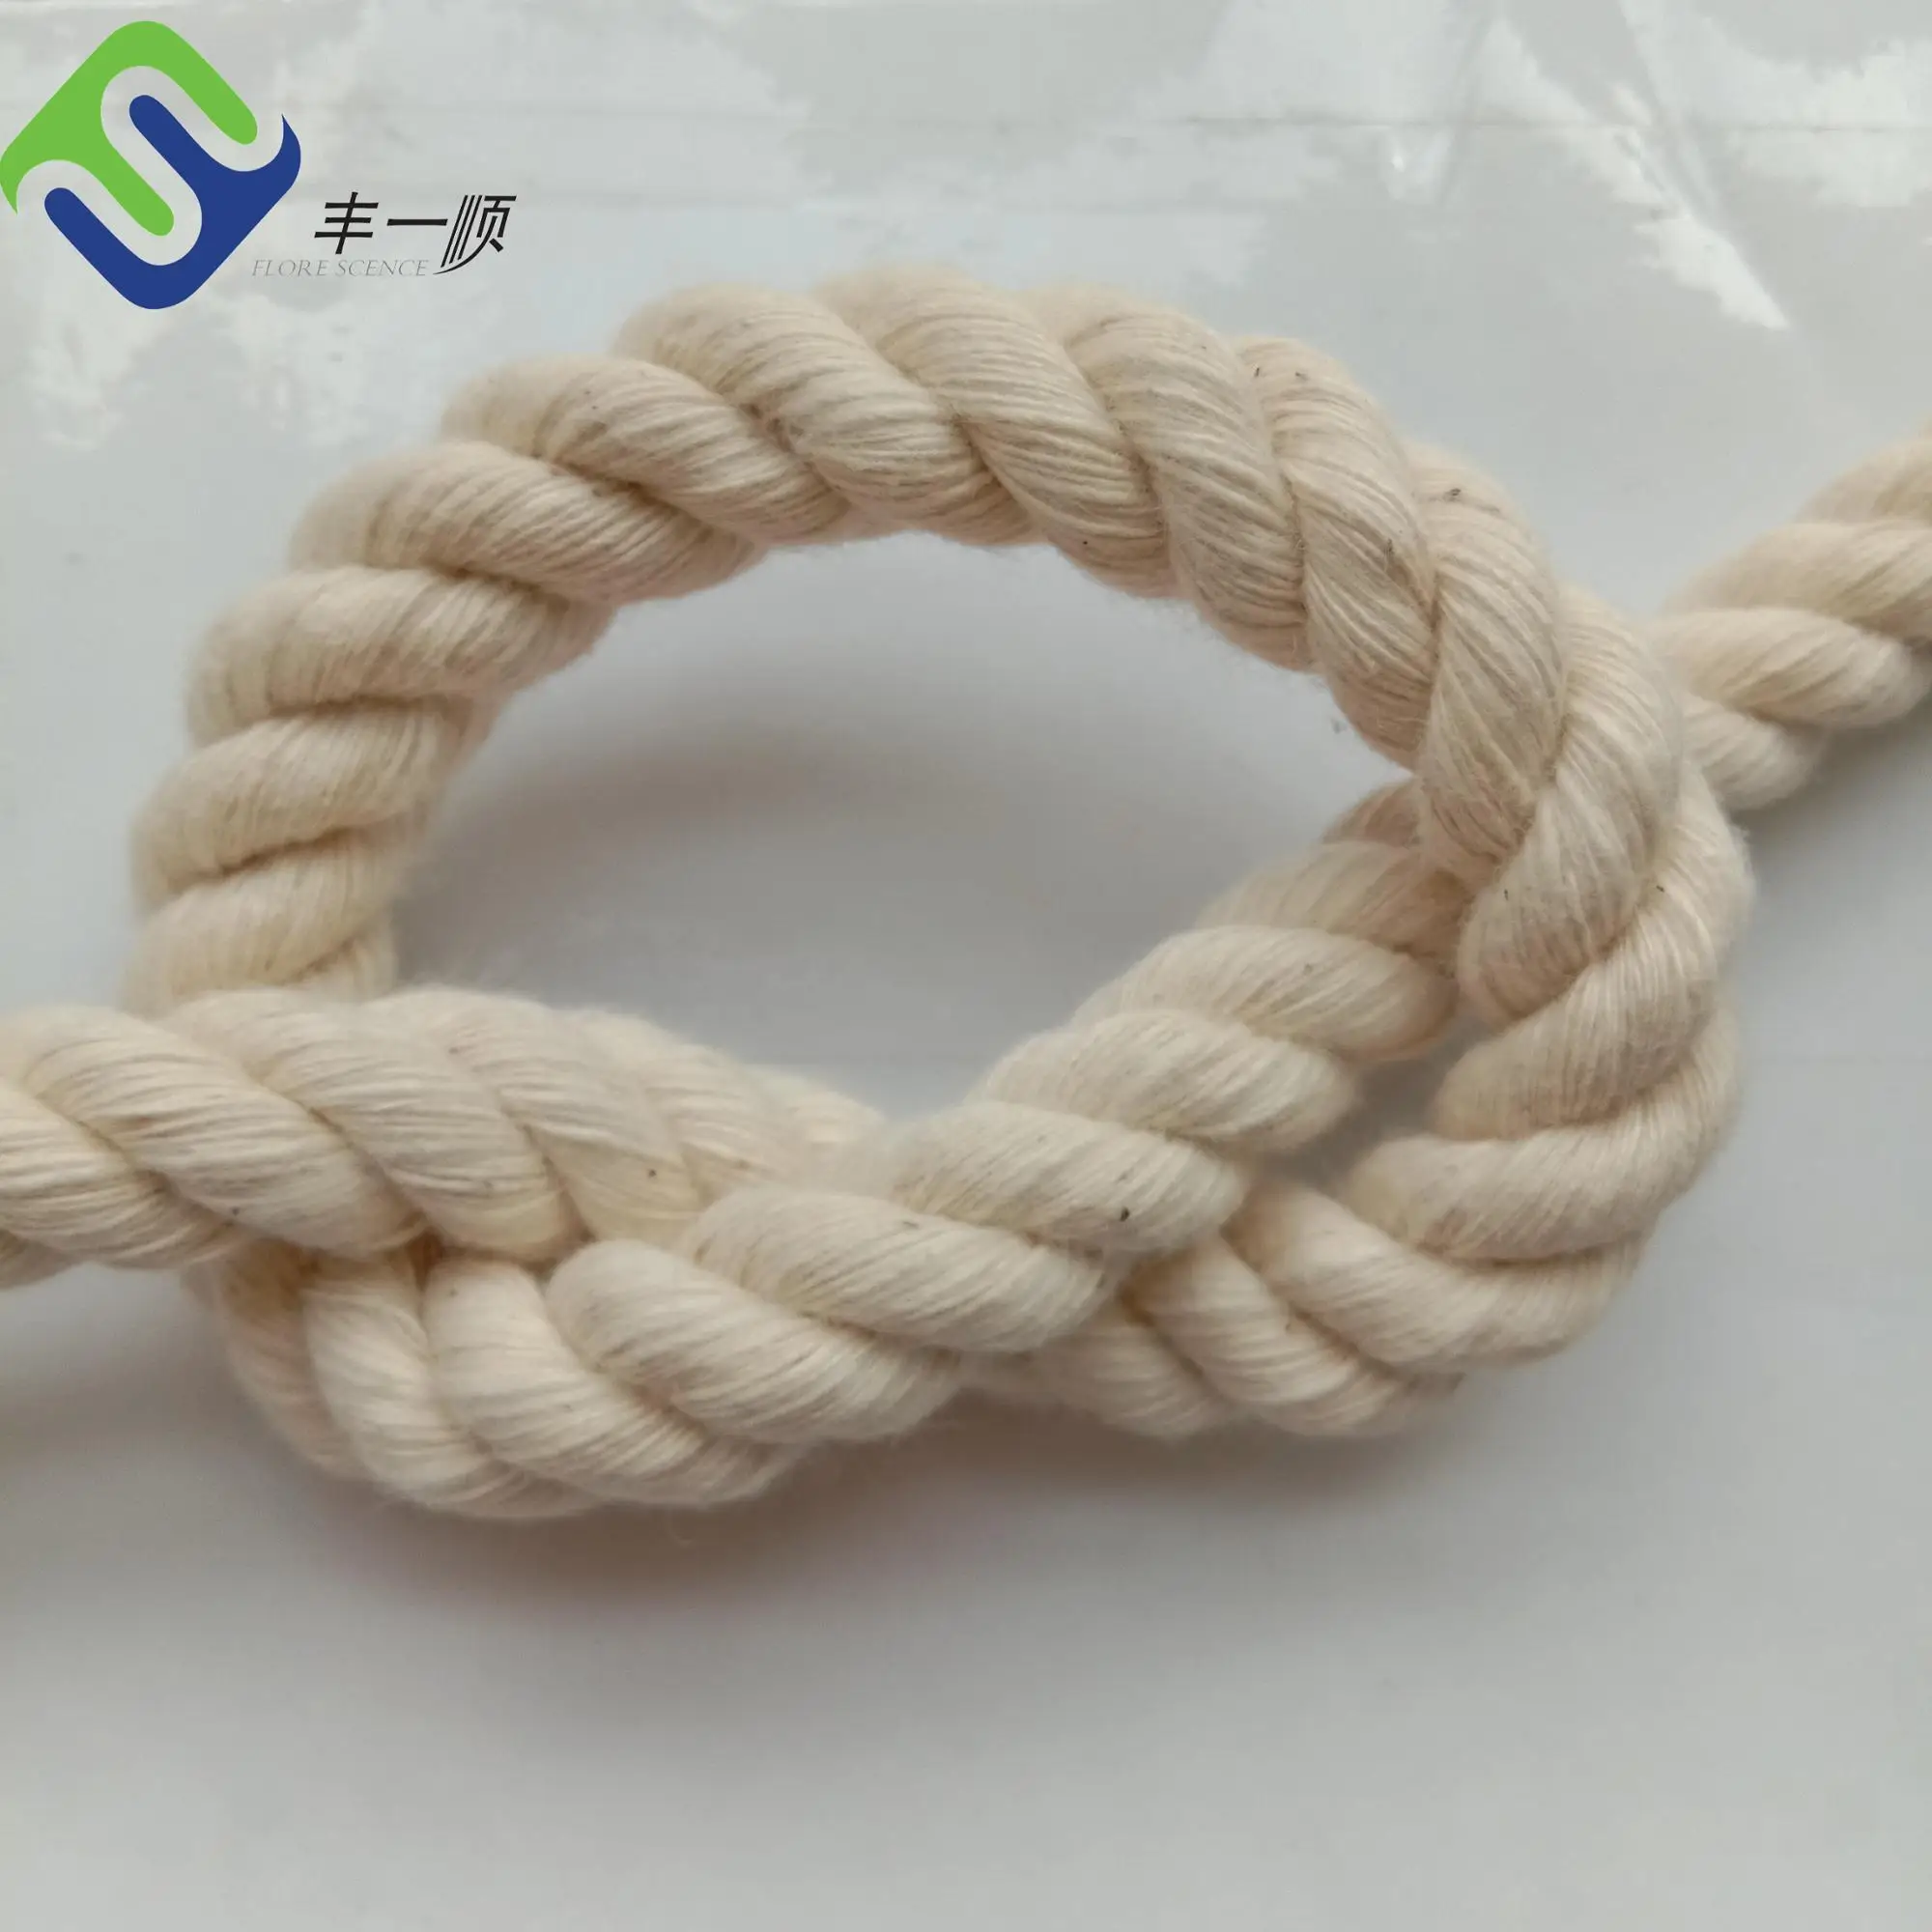 Twisted Wholesale Cotton Rope/cord 